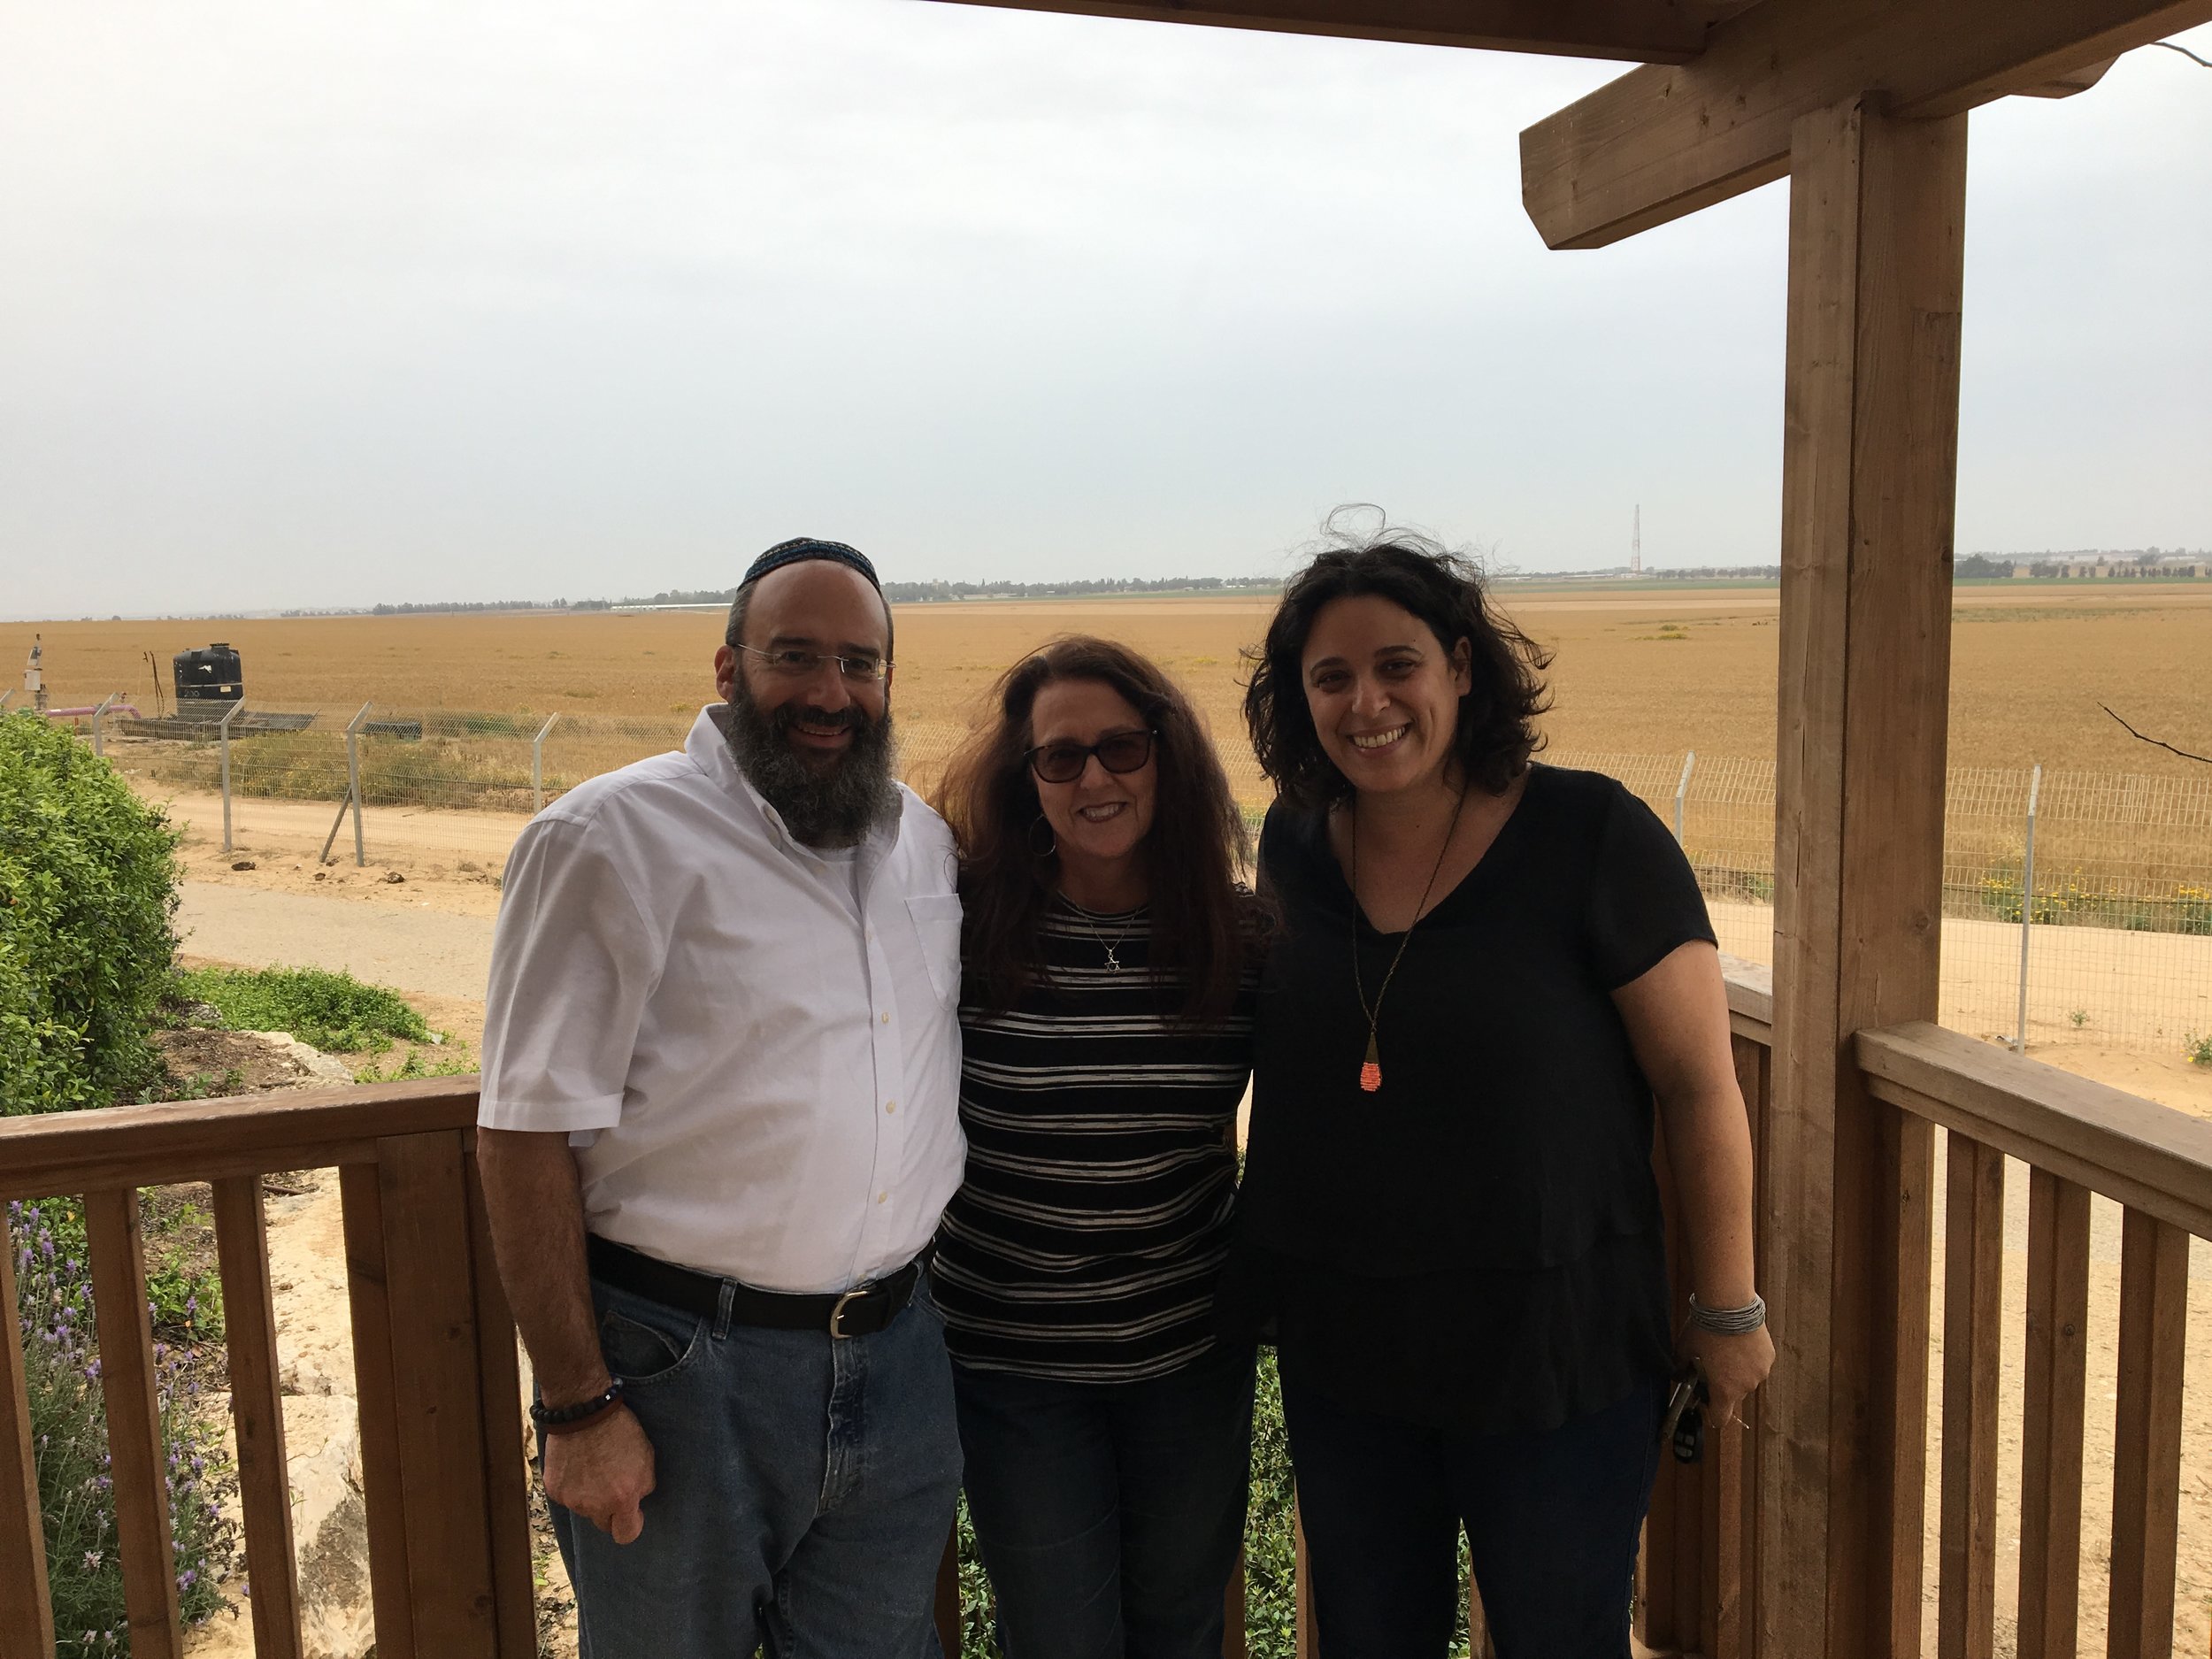 Shmuel Bowman, Deby Brown and Limor Eilat are standing less than a mile from the Gaza border.